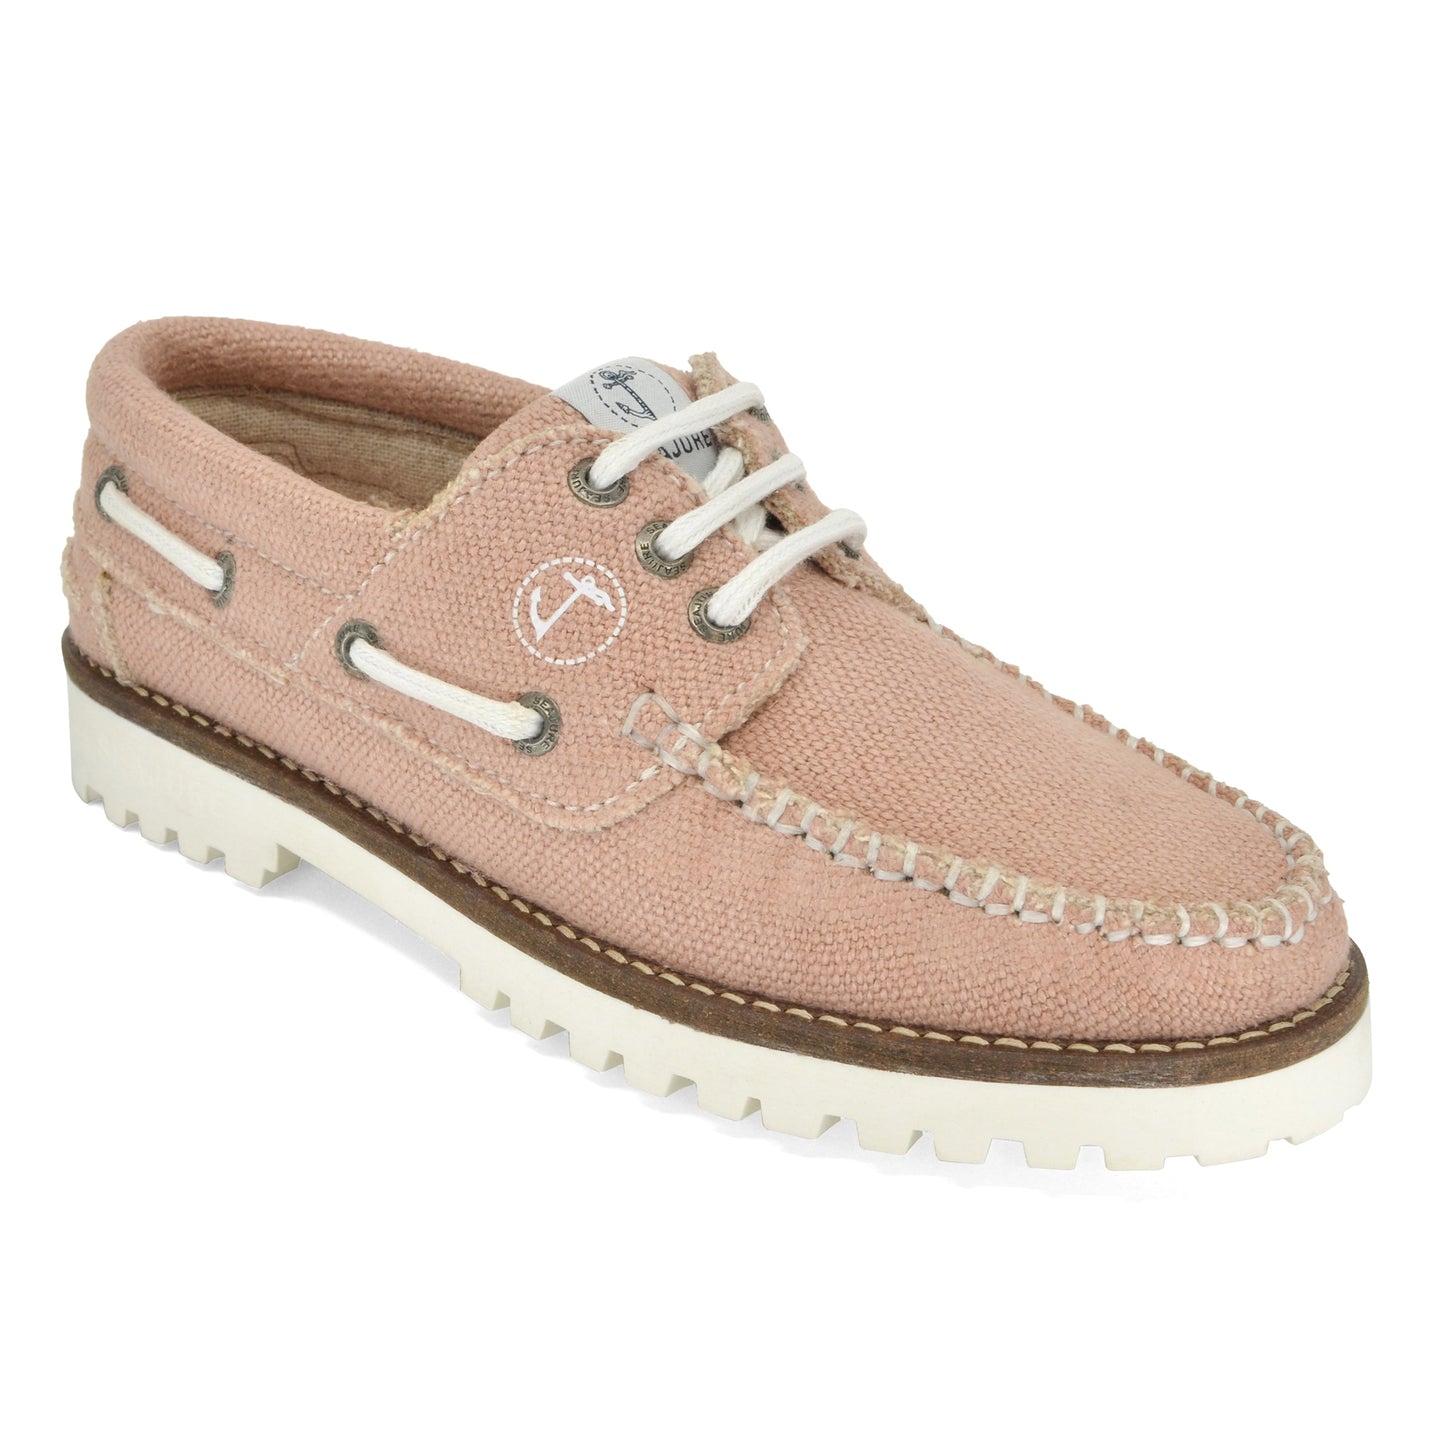 A light pink Women Hemp & Vegan Boat Shoe Pasjaca by Amethyst Hestia with white laces and a white rubber sole, displayed on a white background.